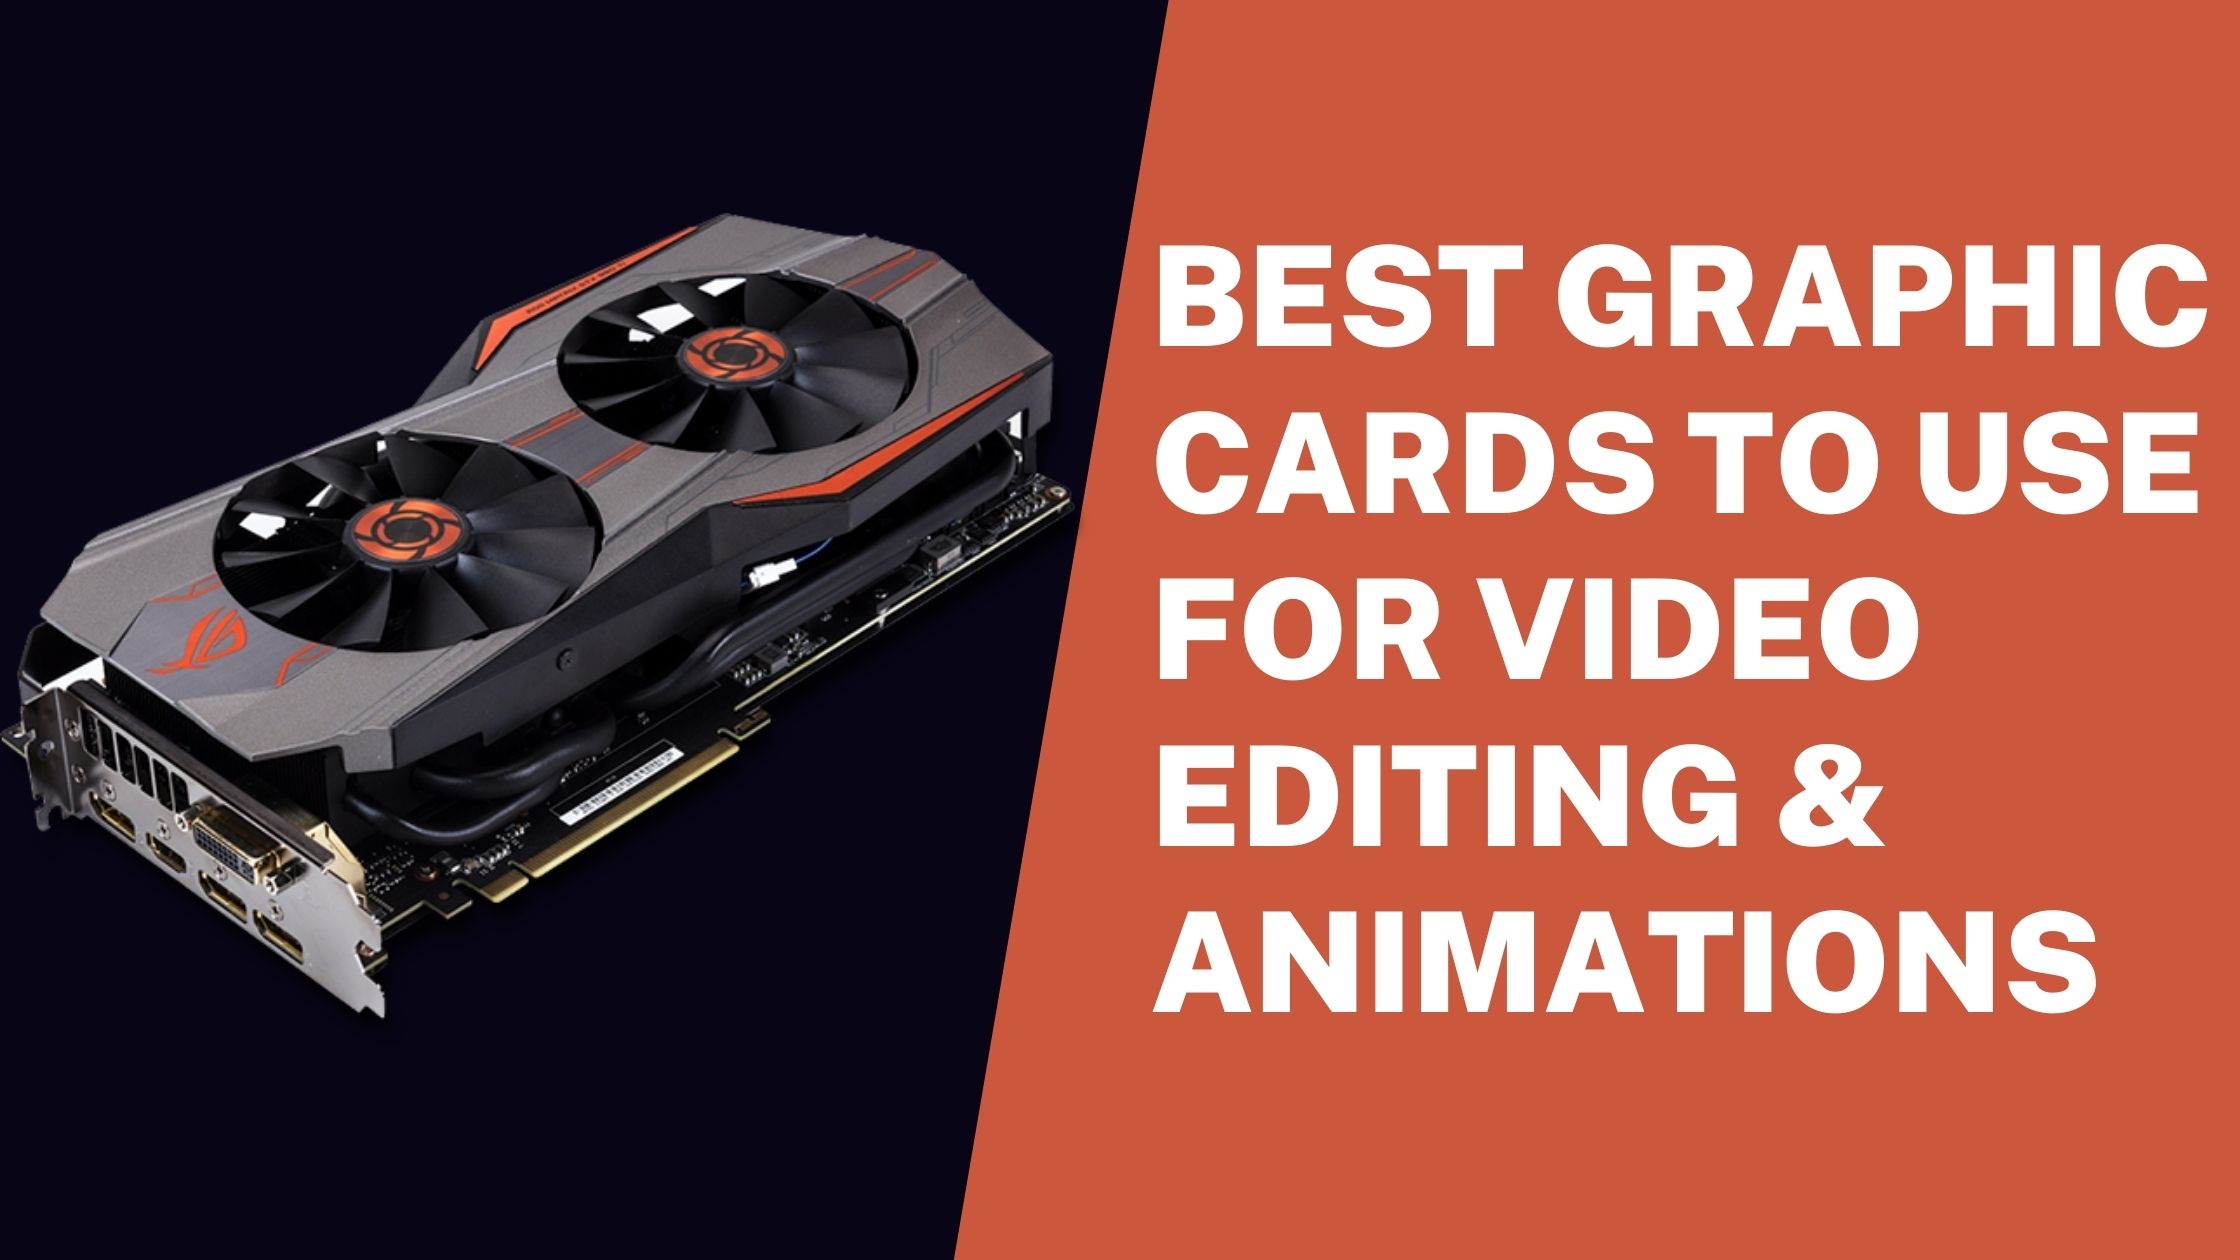 Best Graphic Cards To Use for Video Editing & Animations